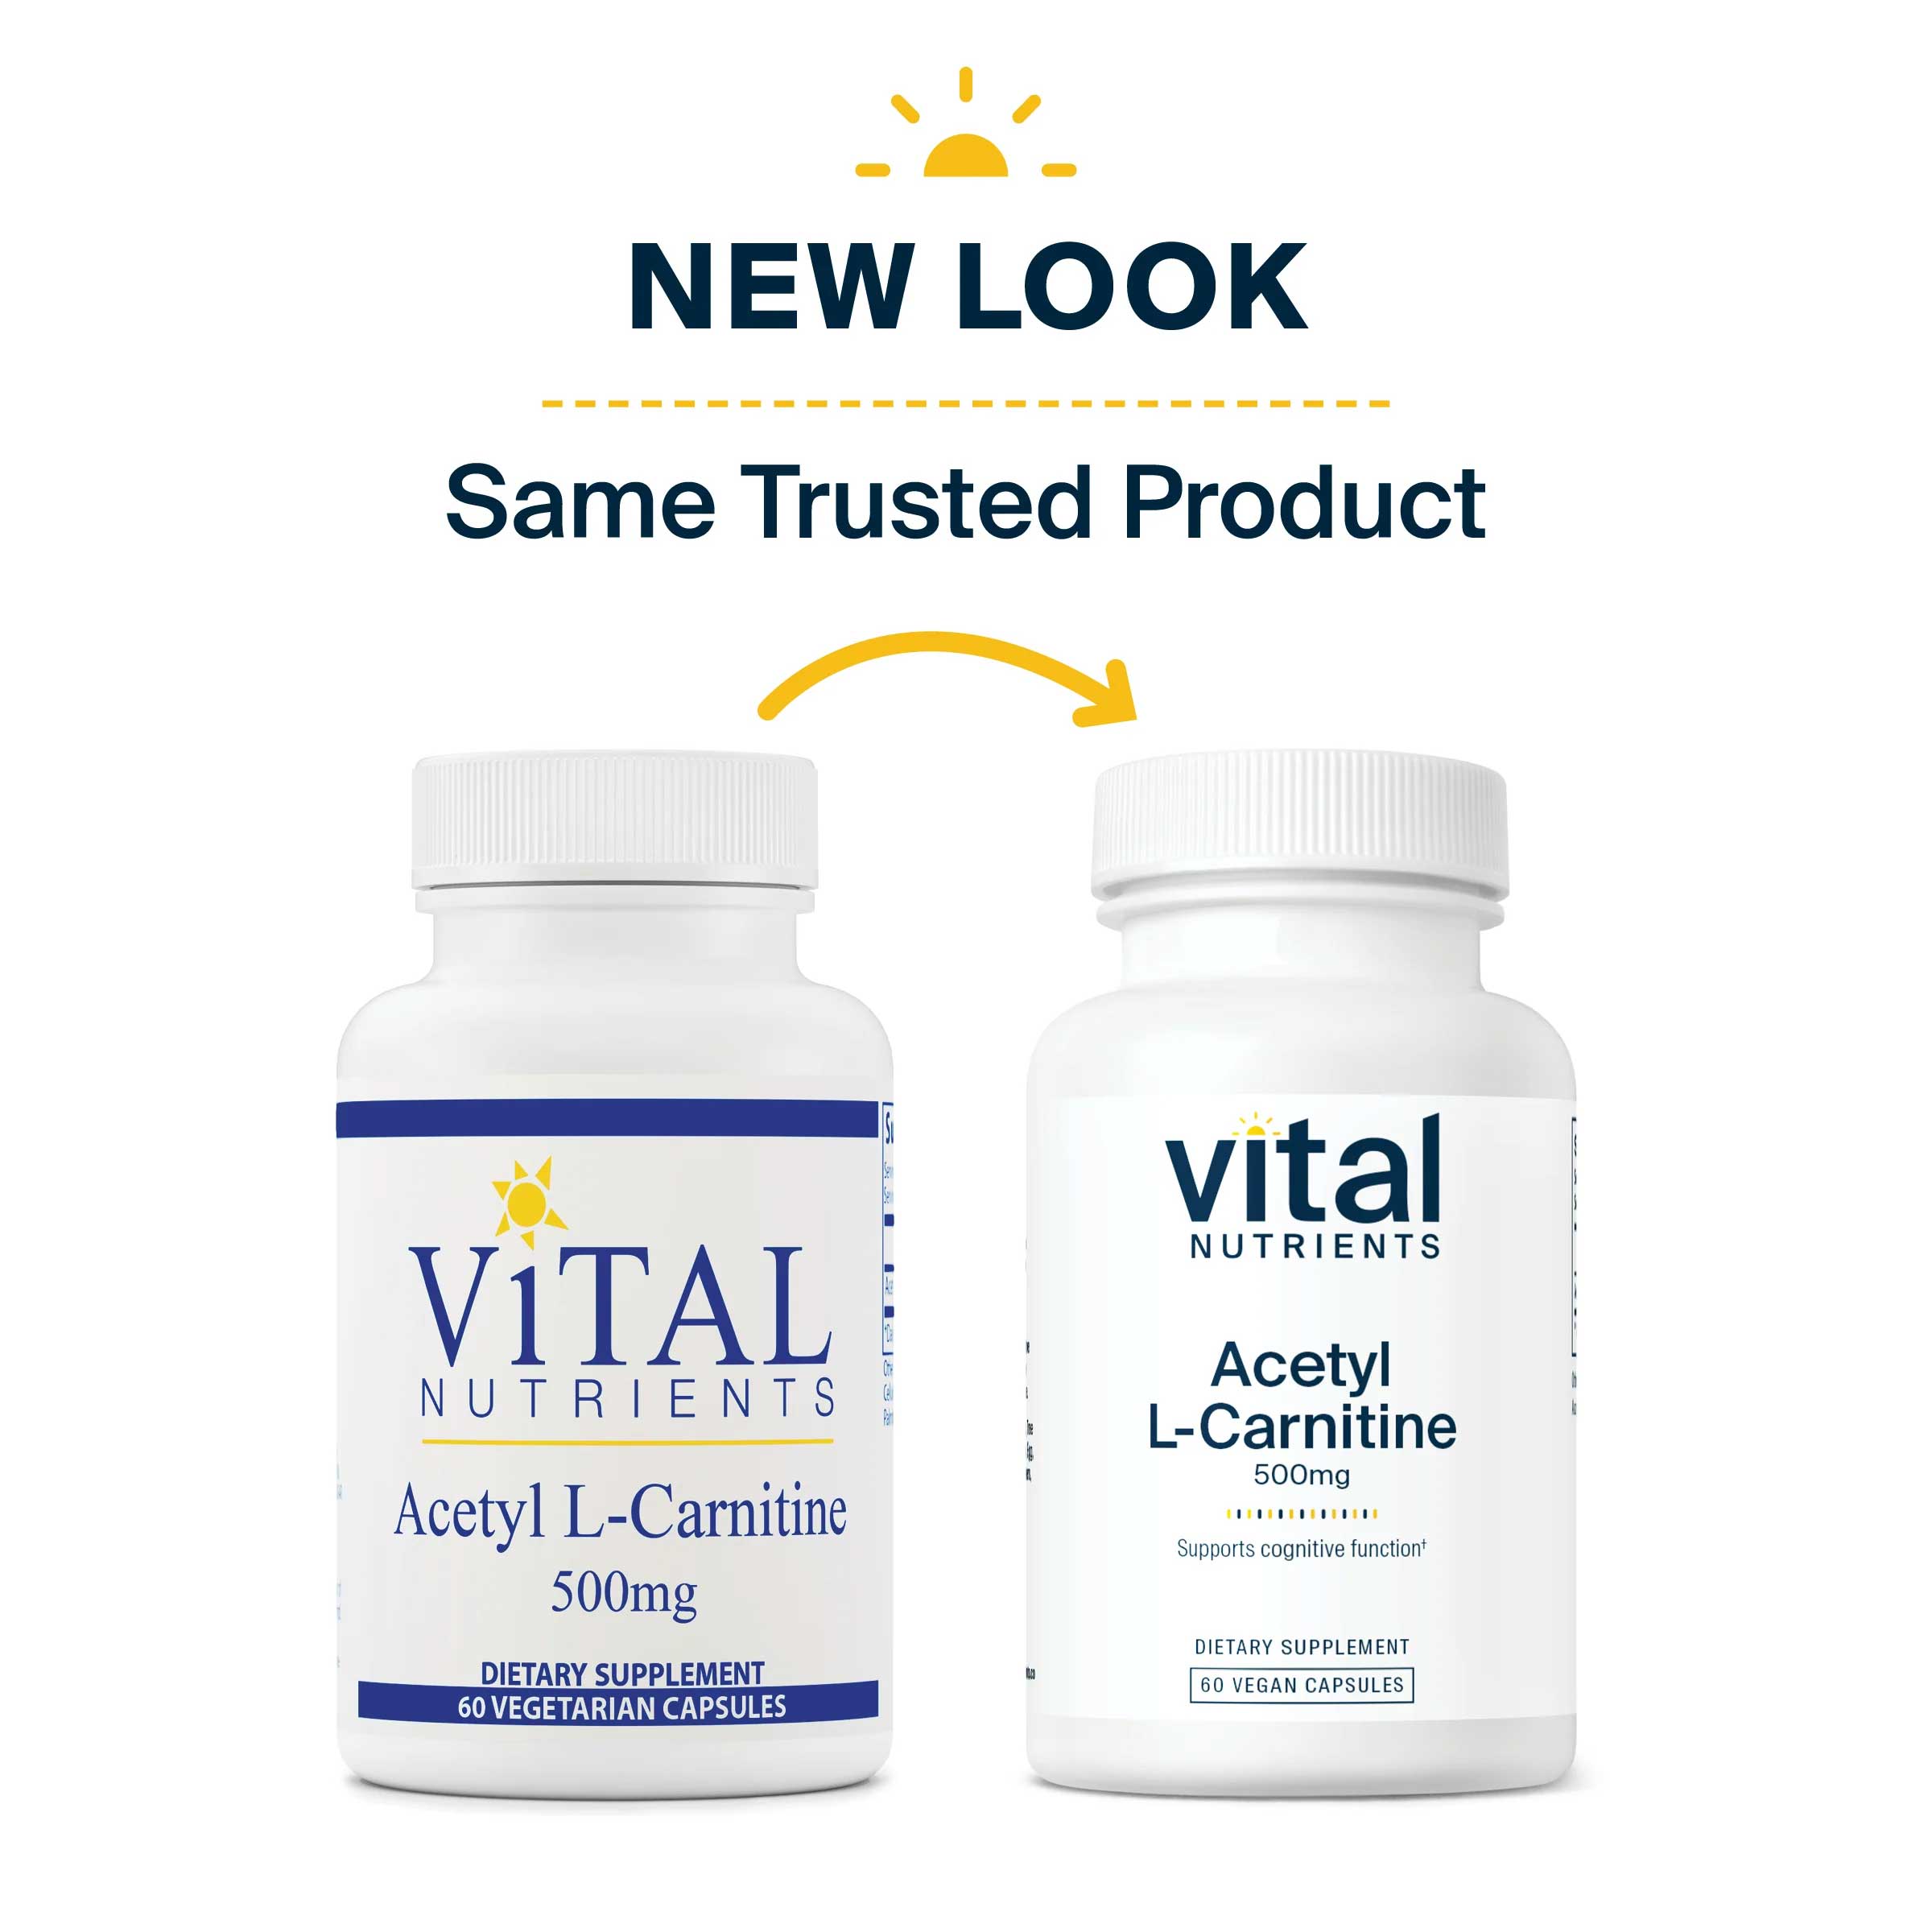 Vital Nutrients Acetyl L-Carnitine 500mg Capsules New Look